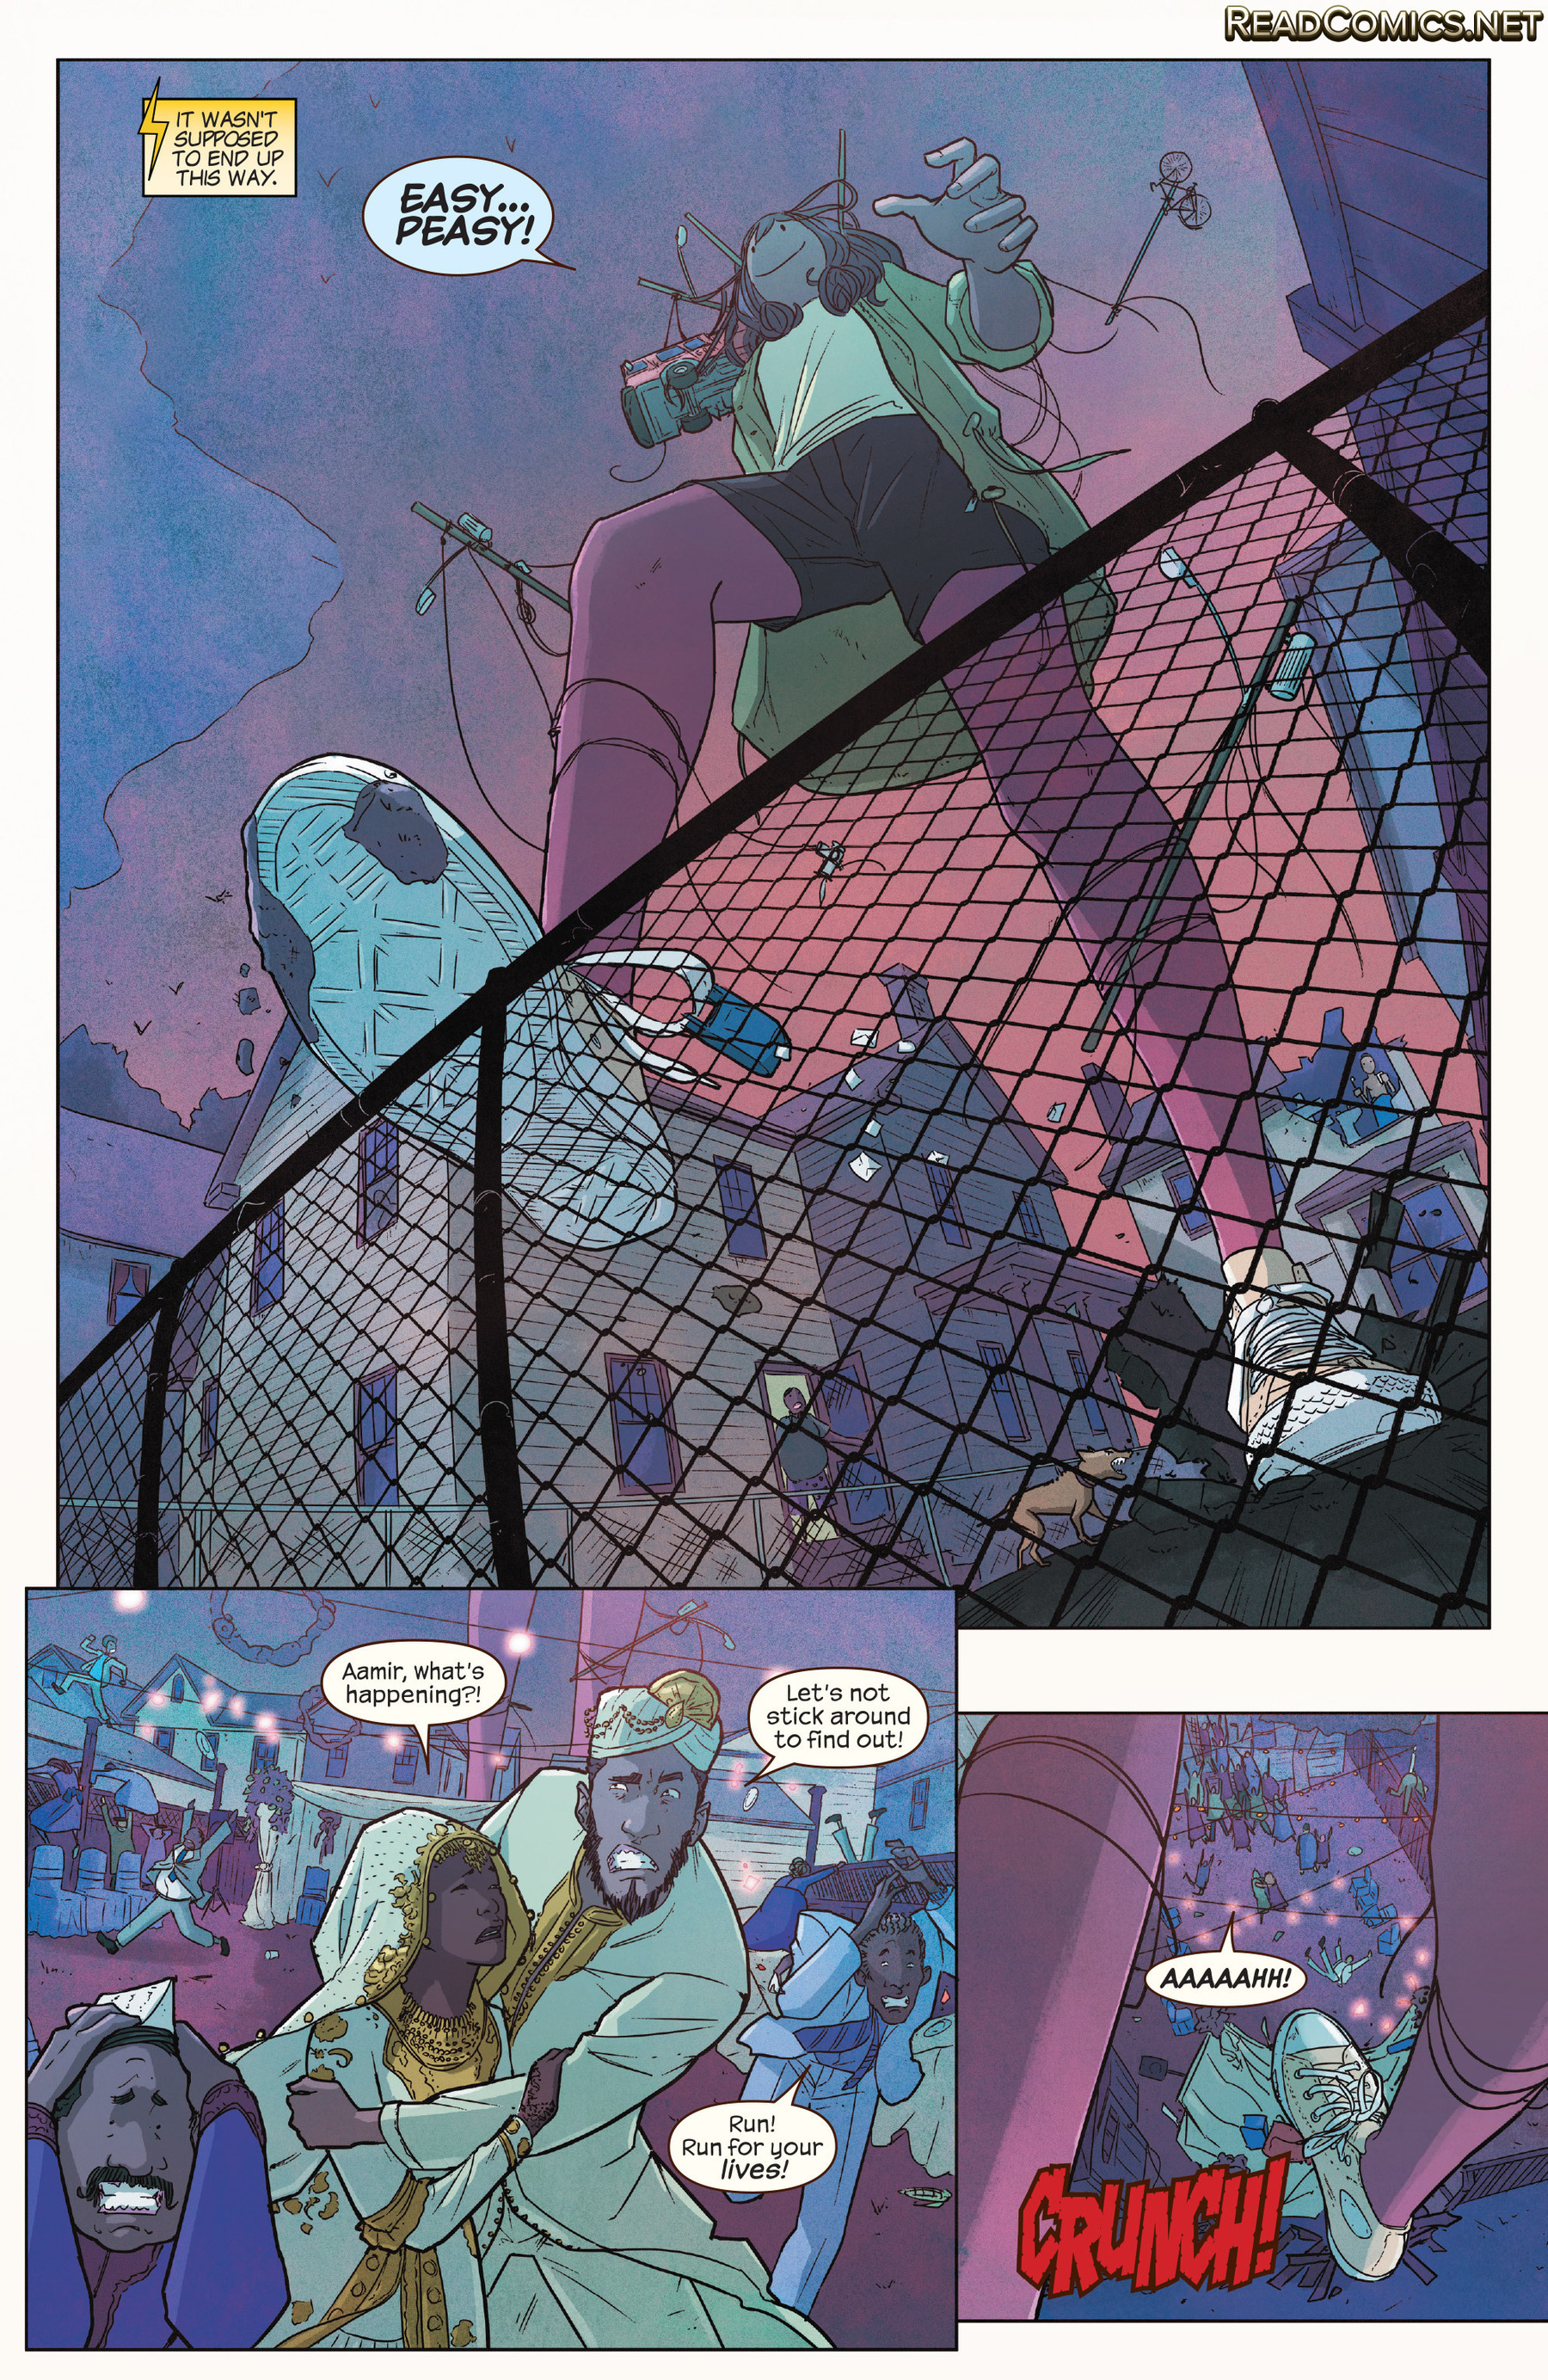 Ms. Marvel (2015-): Chapter 6 - Page 3